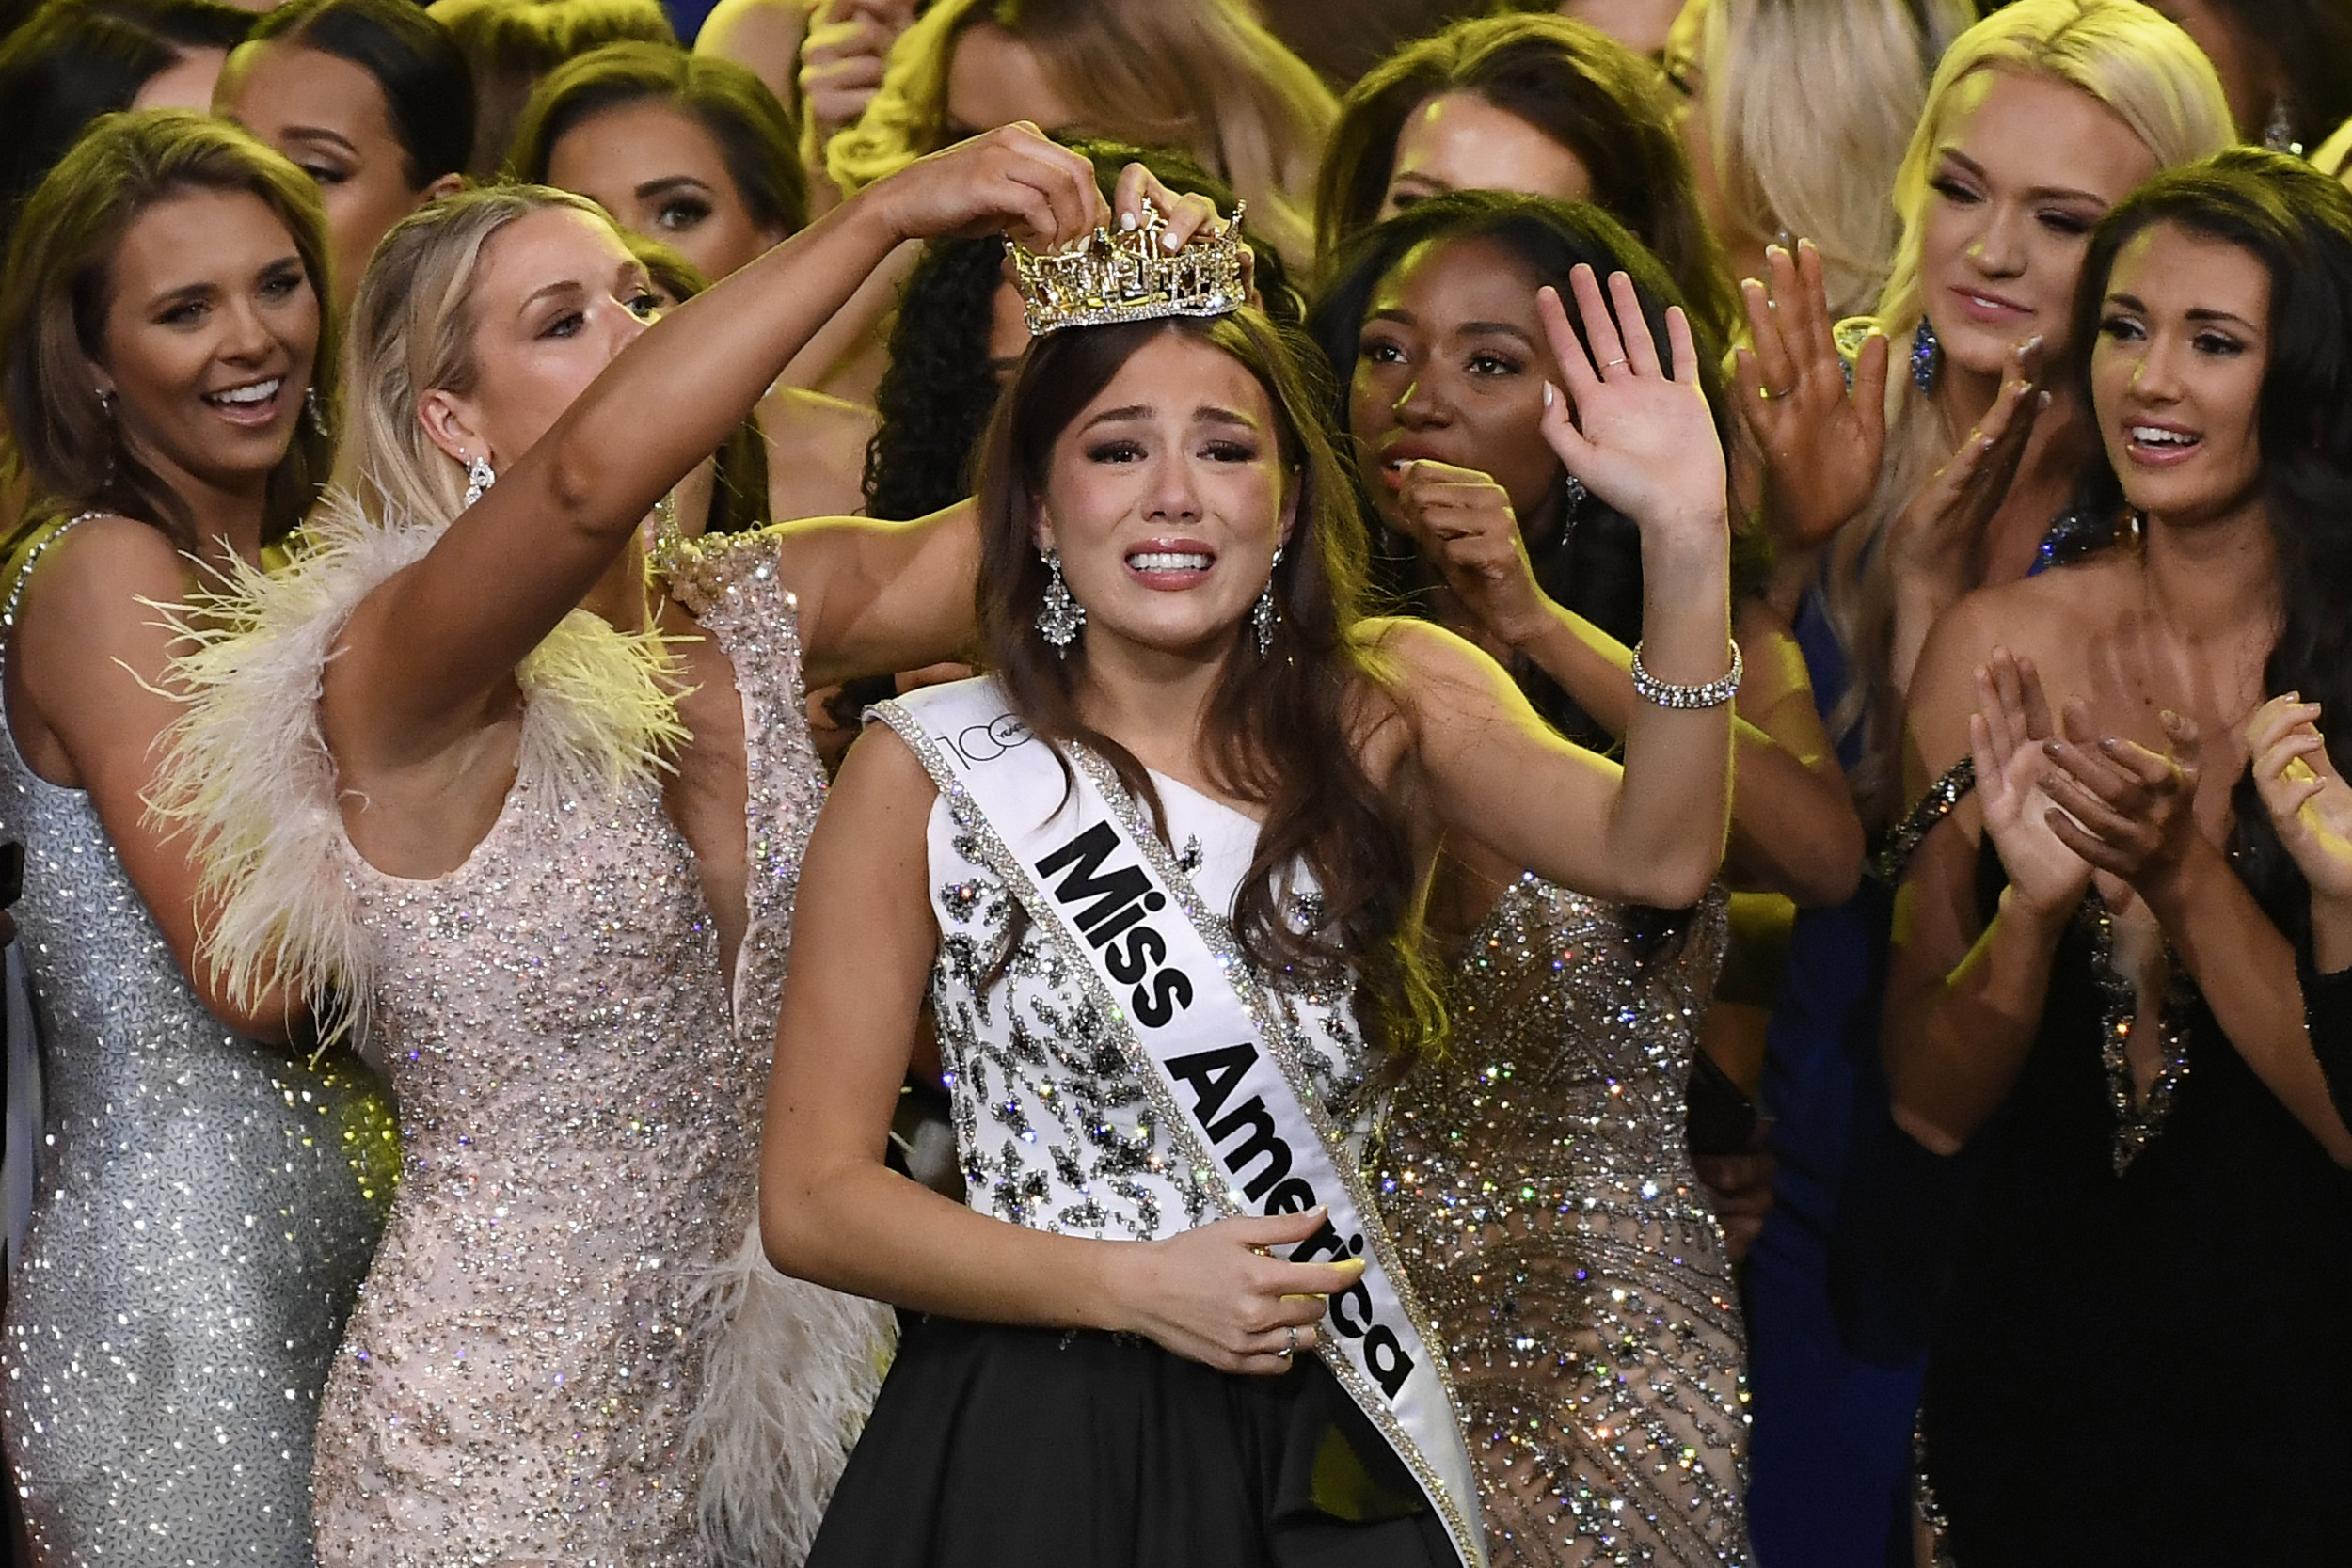 Who Is Miss America 2022 and What Prize Did She Win?